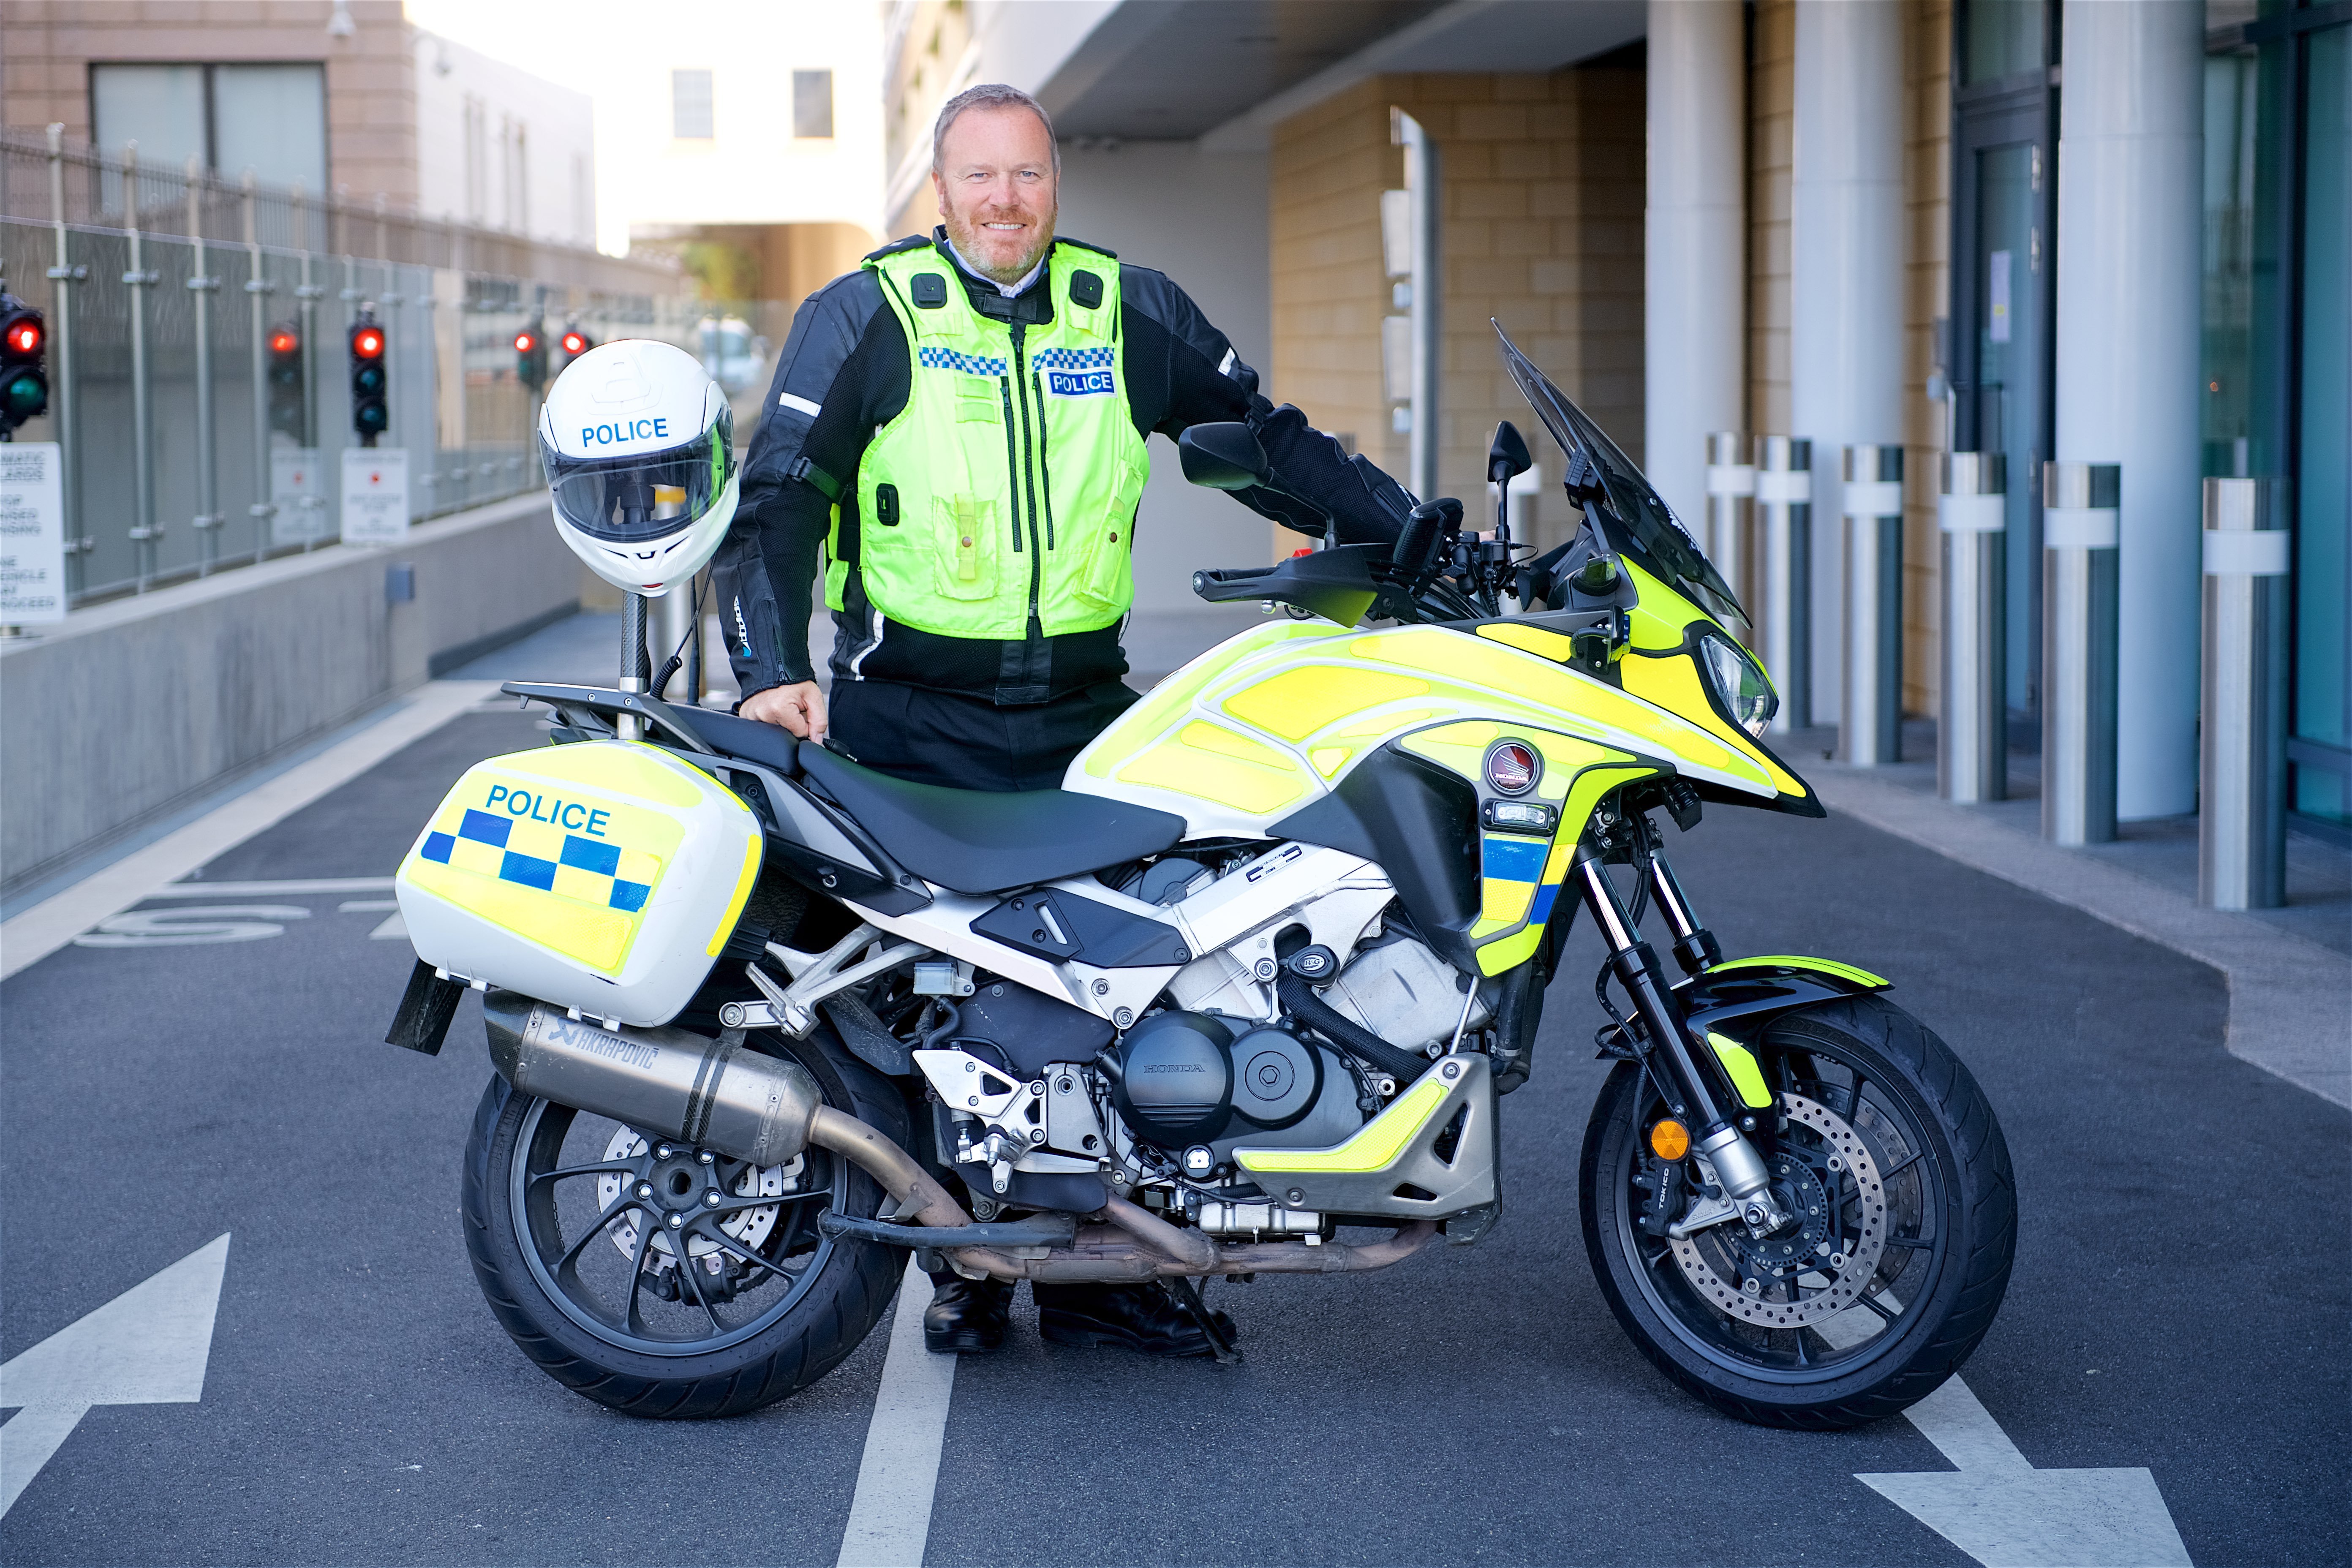 Andy Bisson wearing protective motorbike clothing at Police HQ                                                             Picture: DAVID FERGUSON. (24335997)